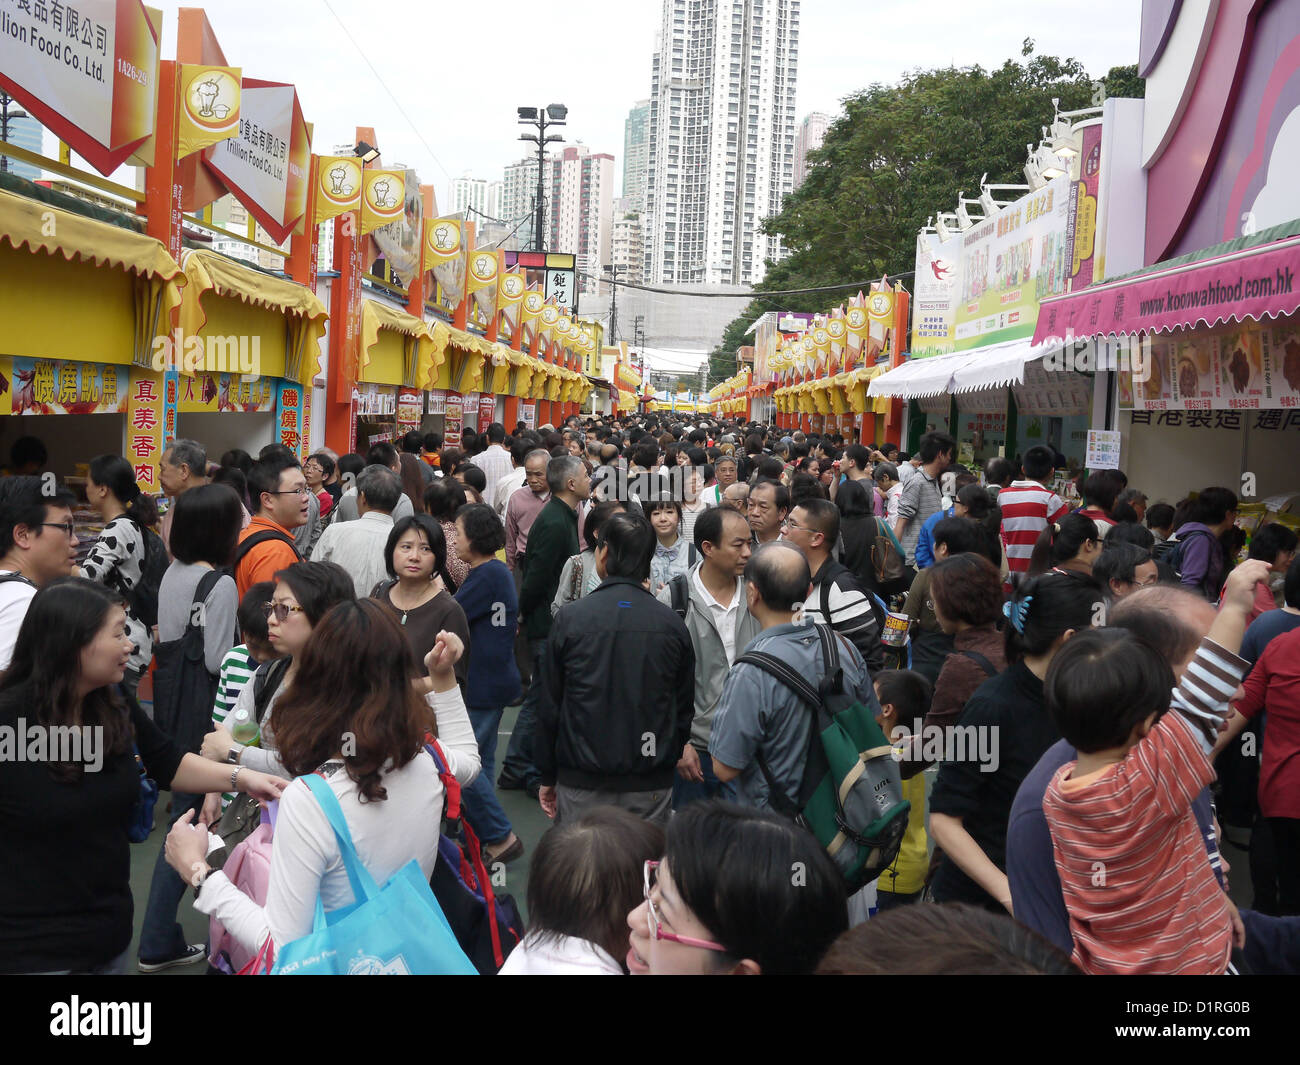 congested public event crowd outdoor hong kong Stock Photo